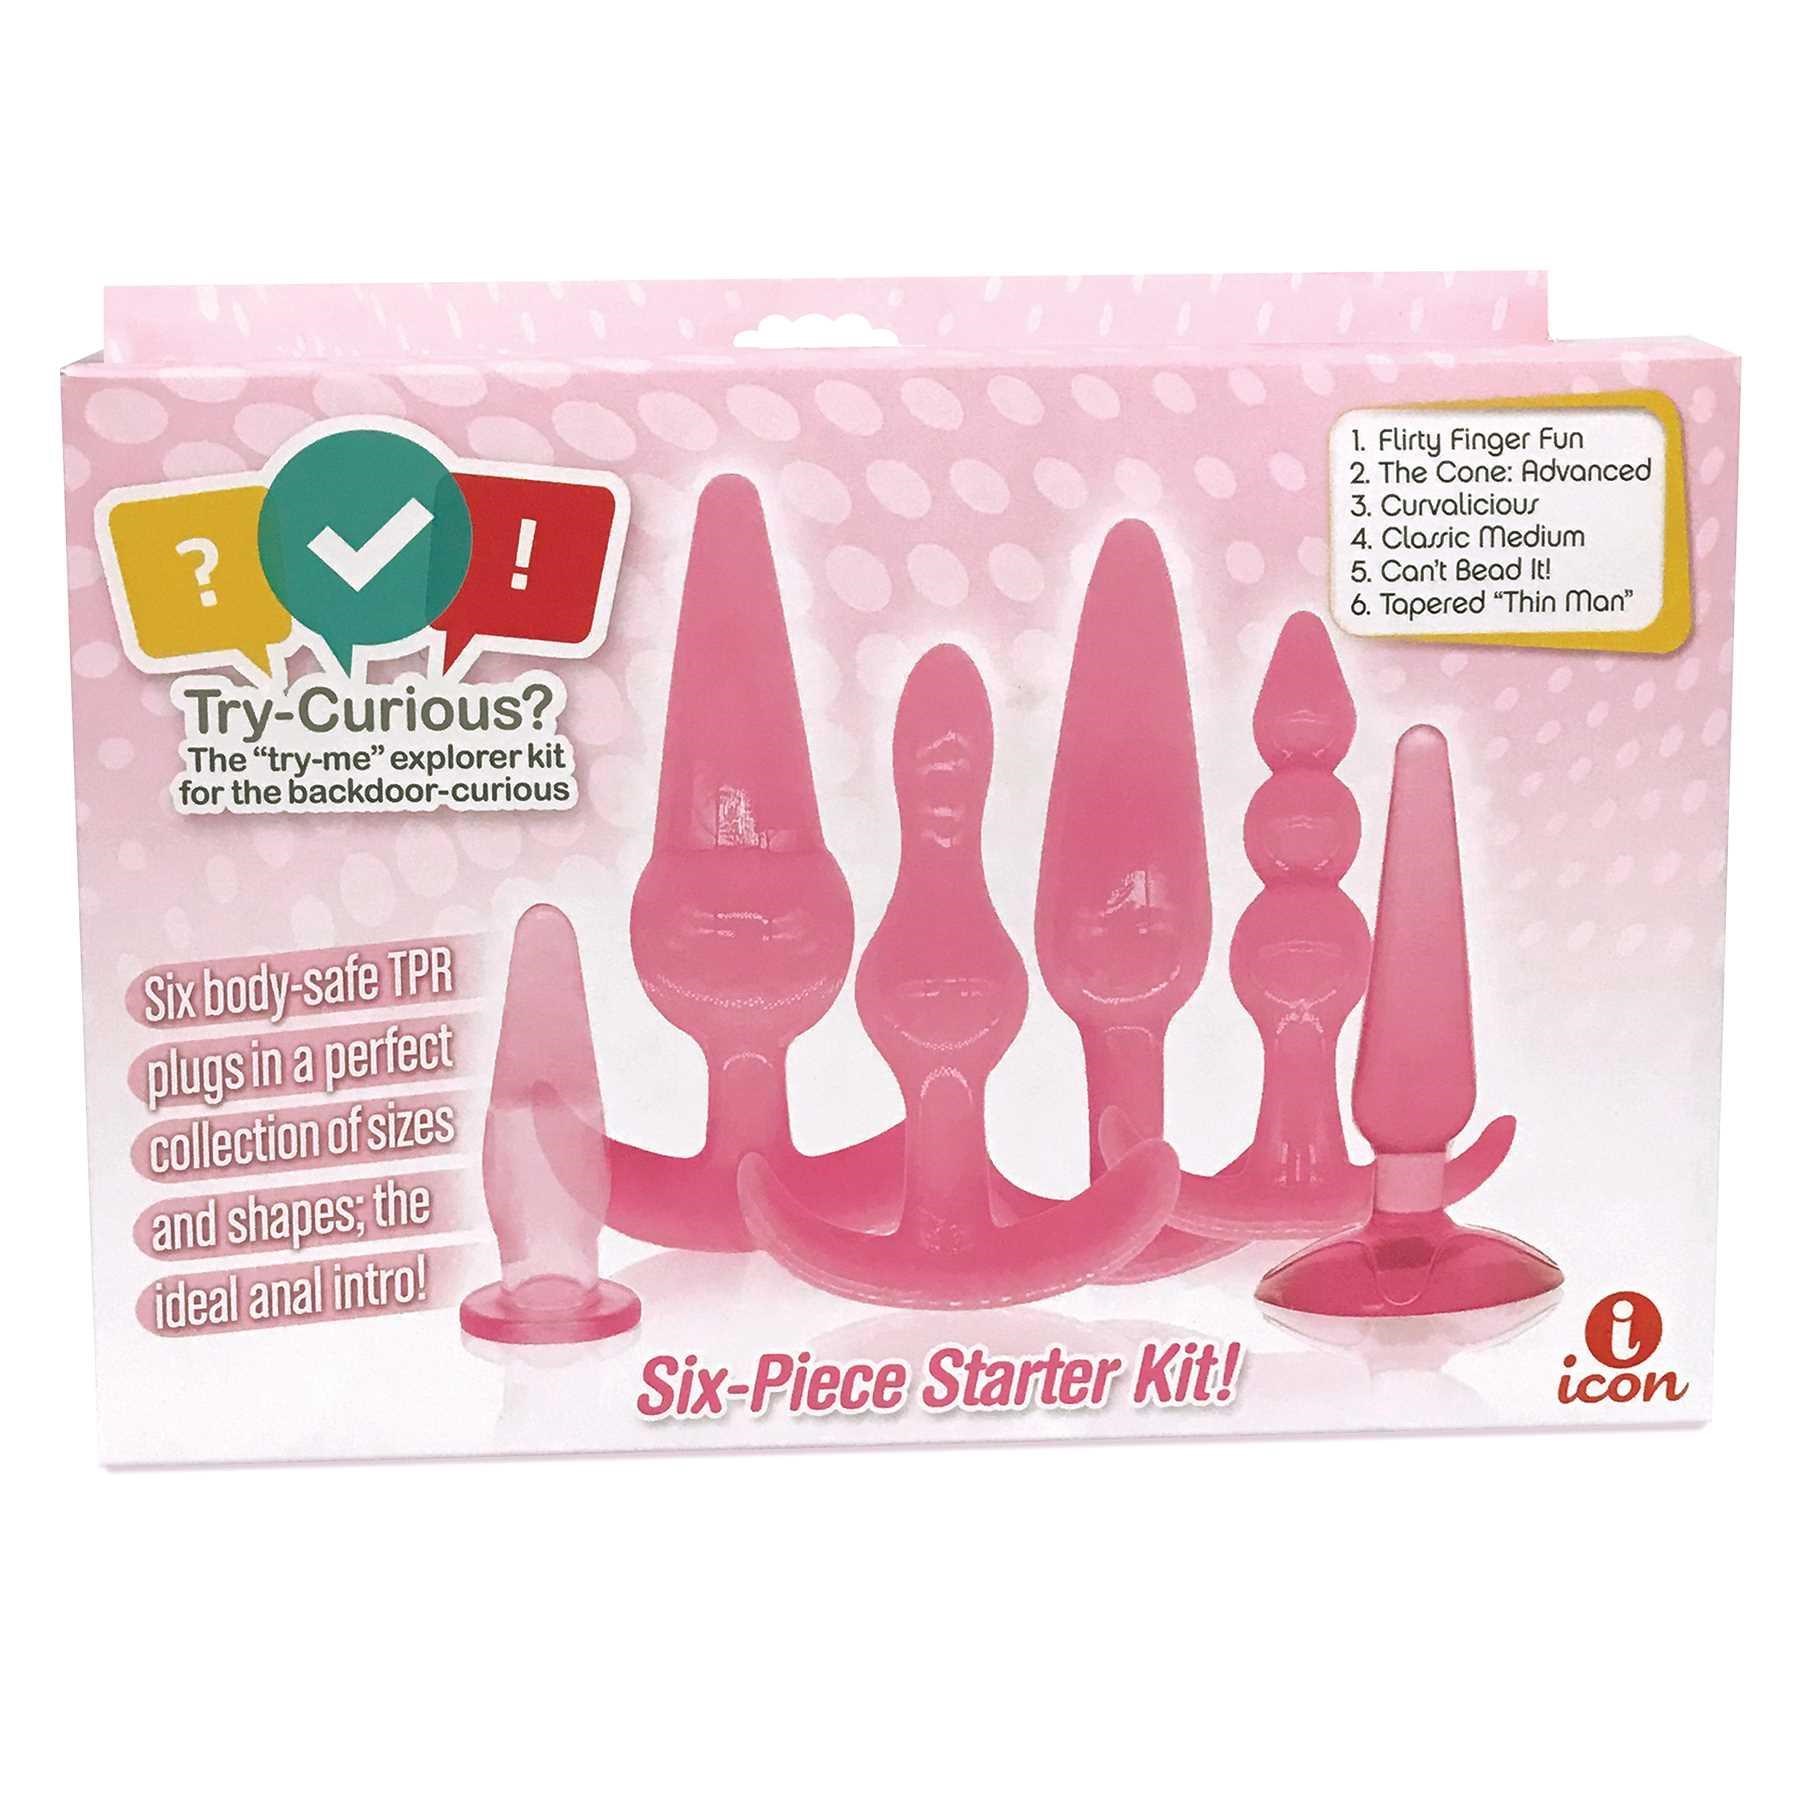 Try-Curious Anal Plug Kit box packaging - pink